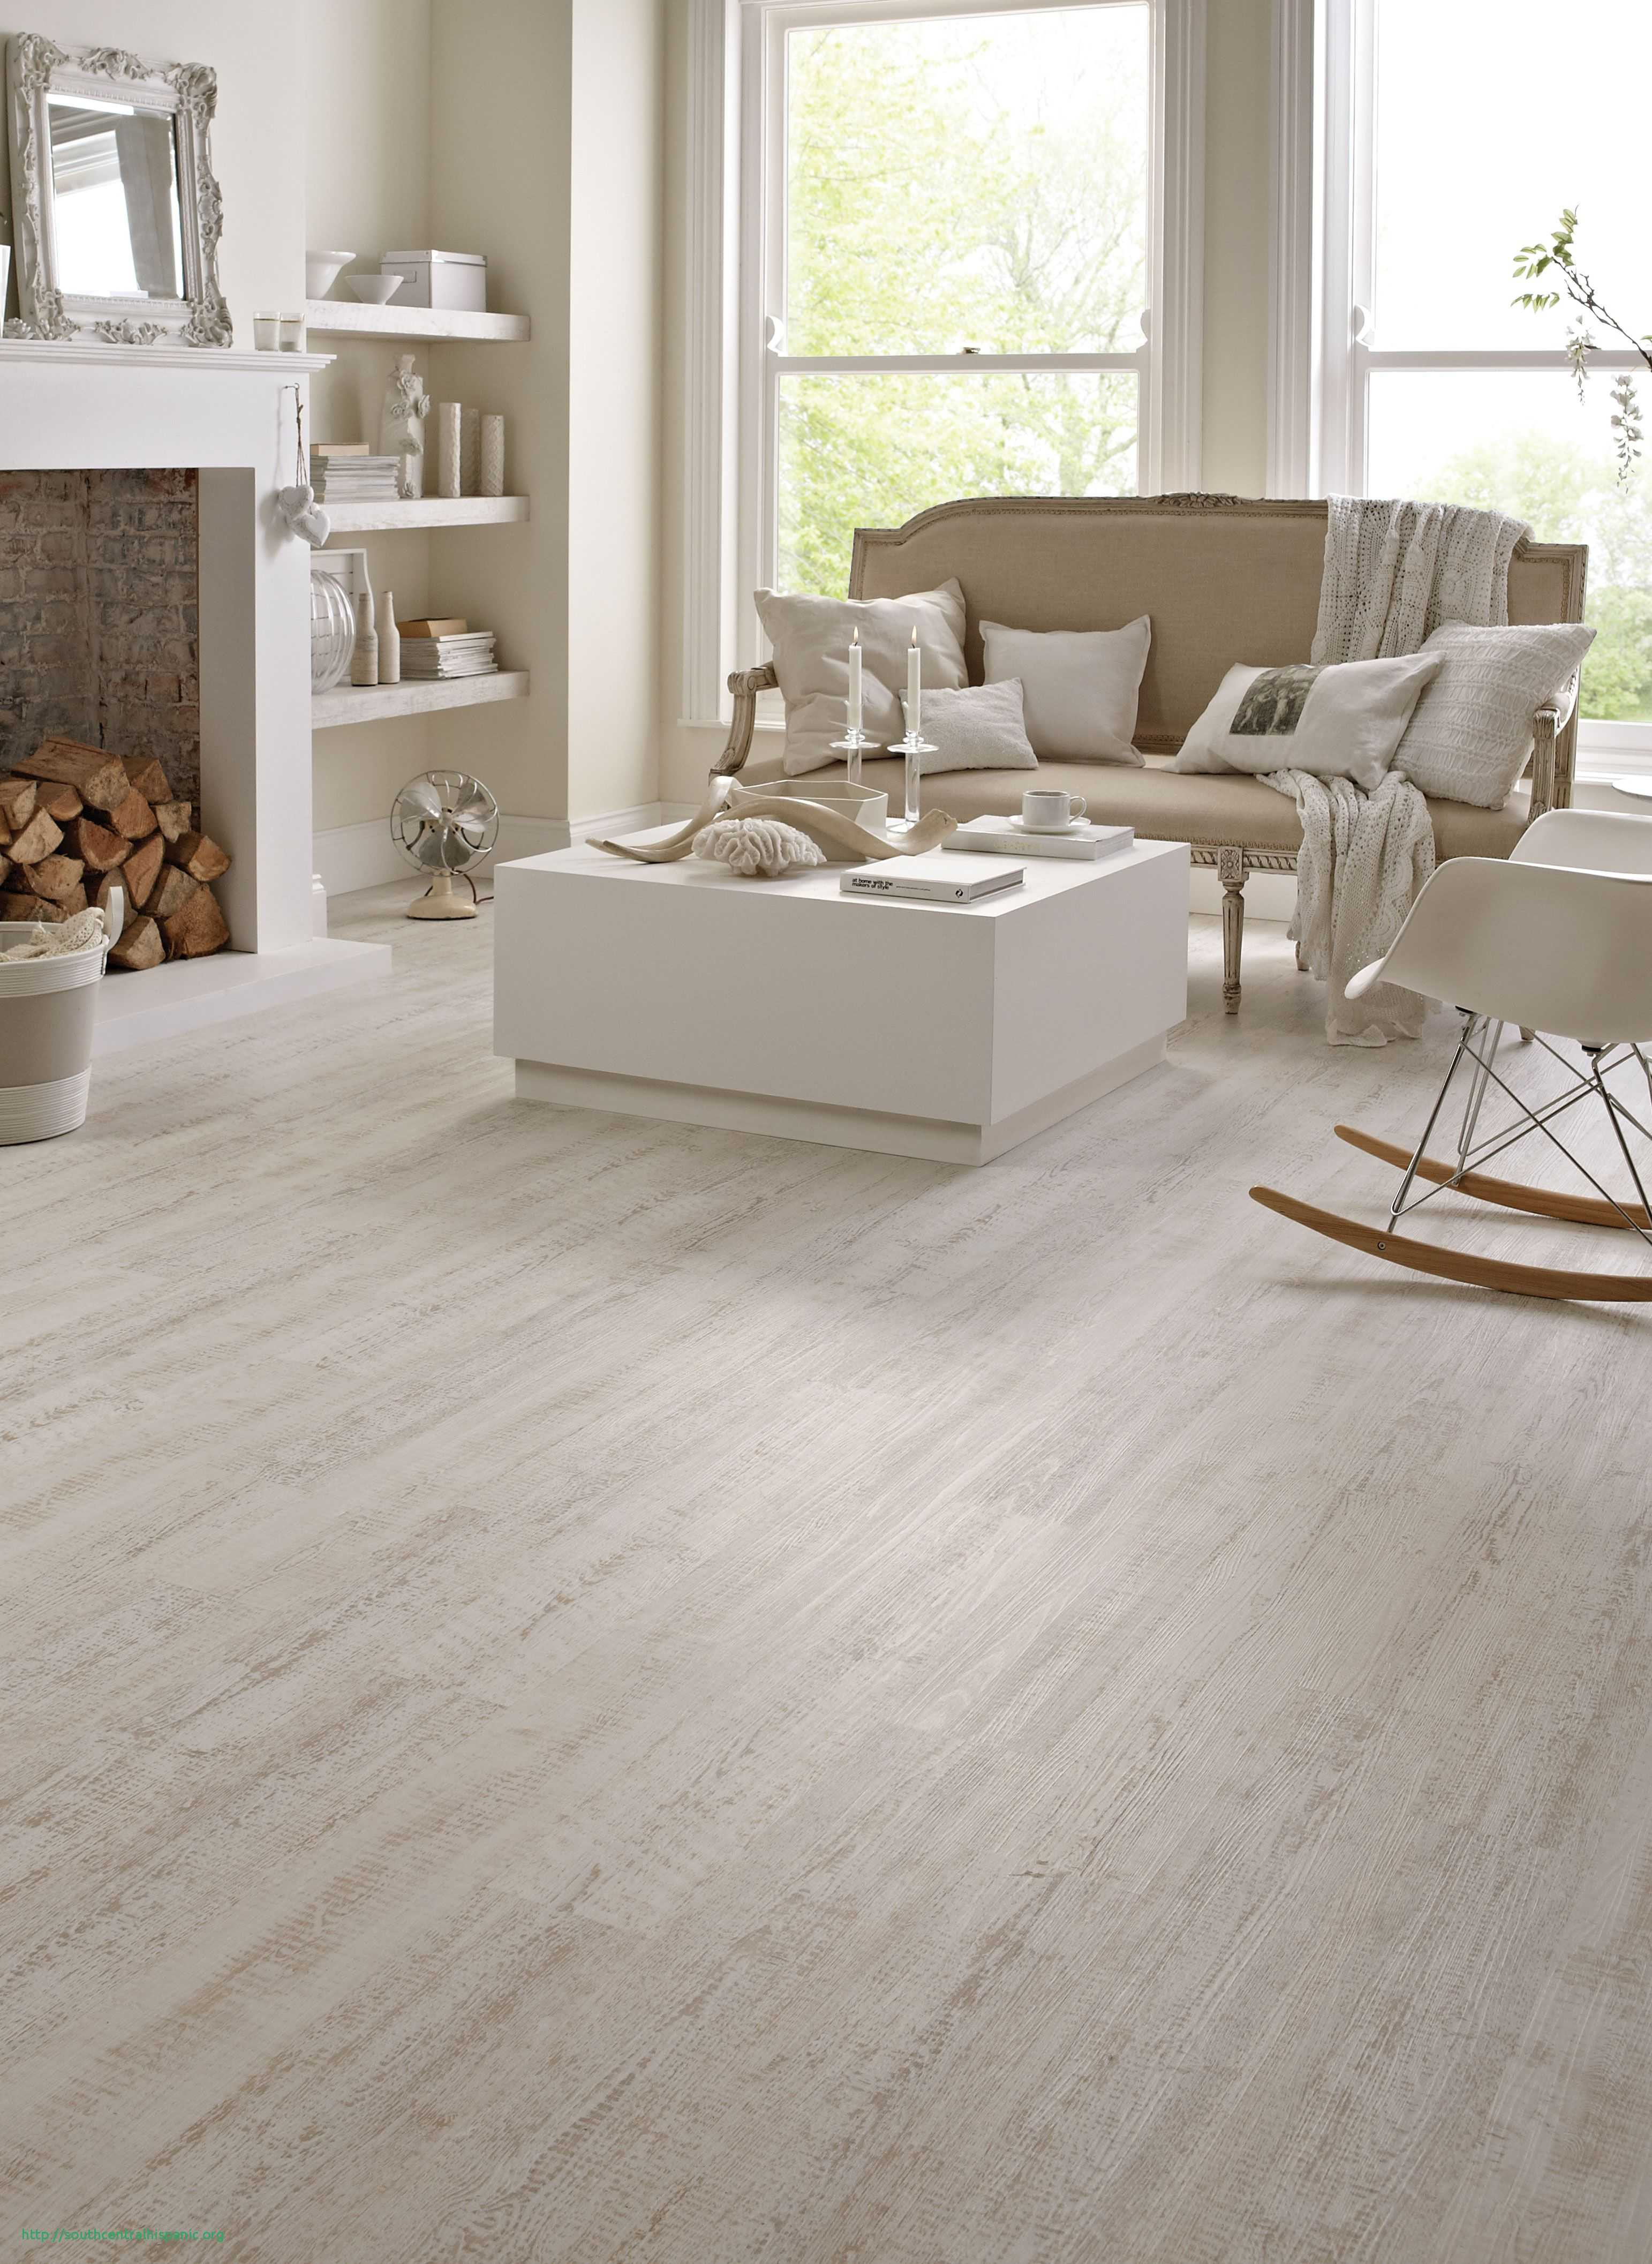 how much do hardwood floors cost calculator of 21 nouveau laminate flooring layout calculator ideas blog intended for karndean wood flooring white painted oak by karndeanfloors available from rodgers of york flooring interiors